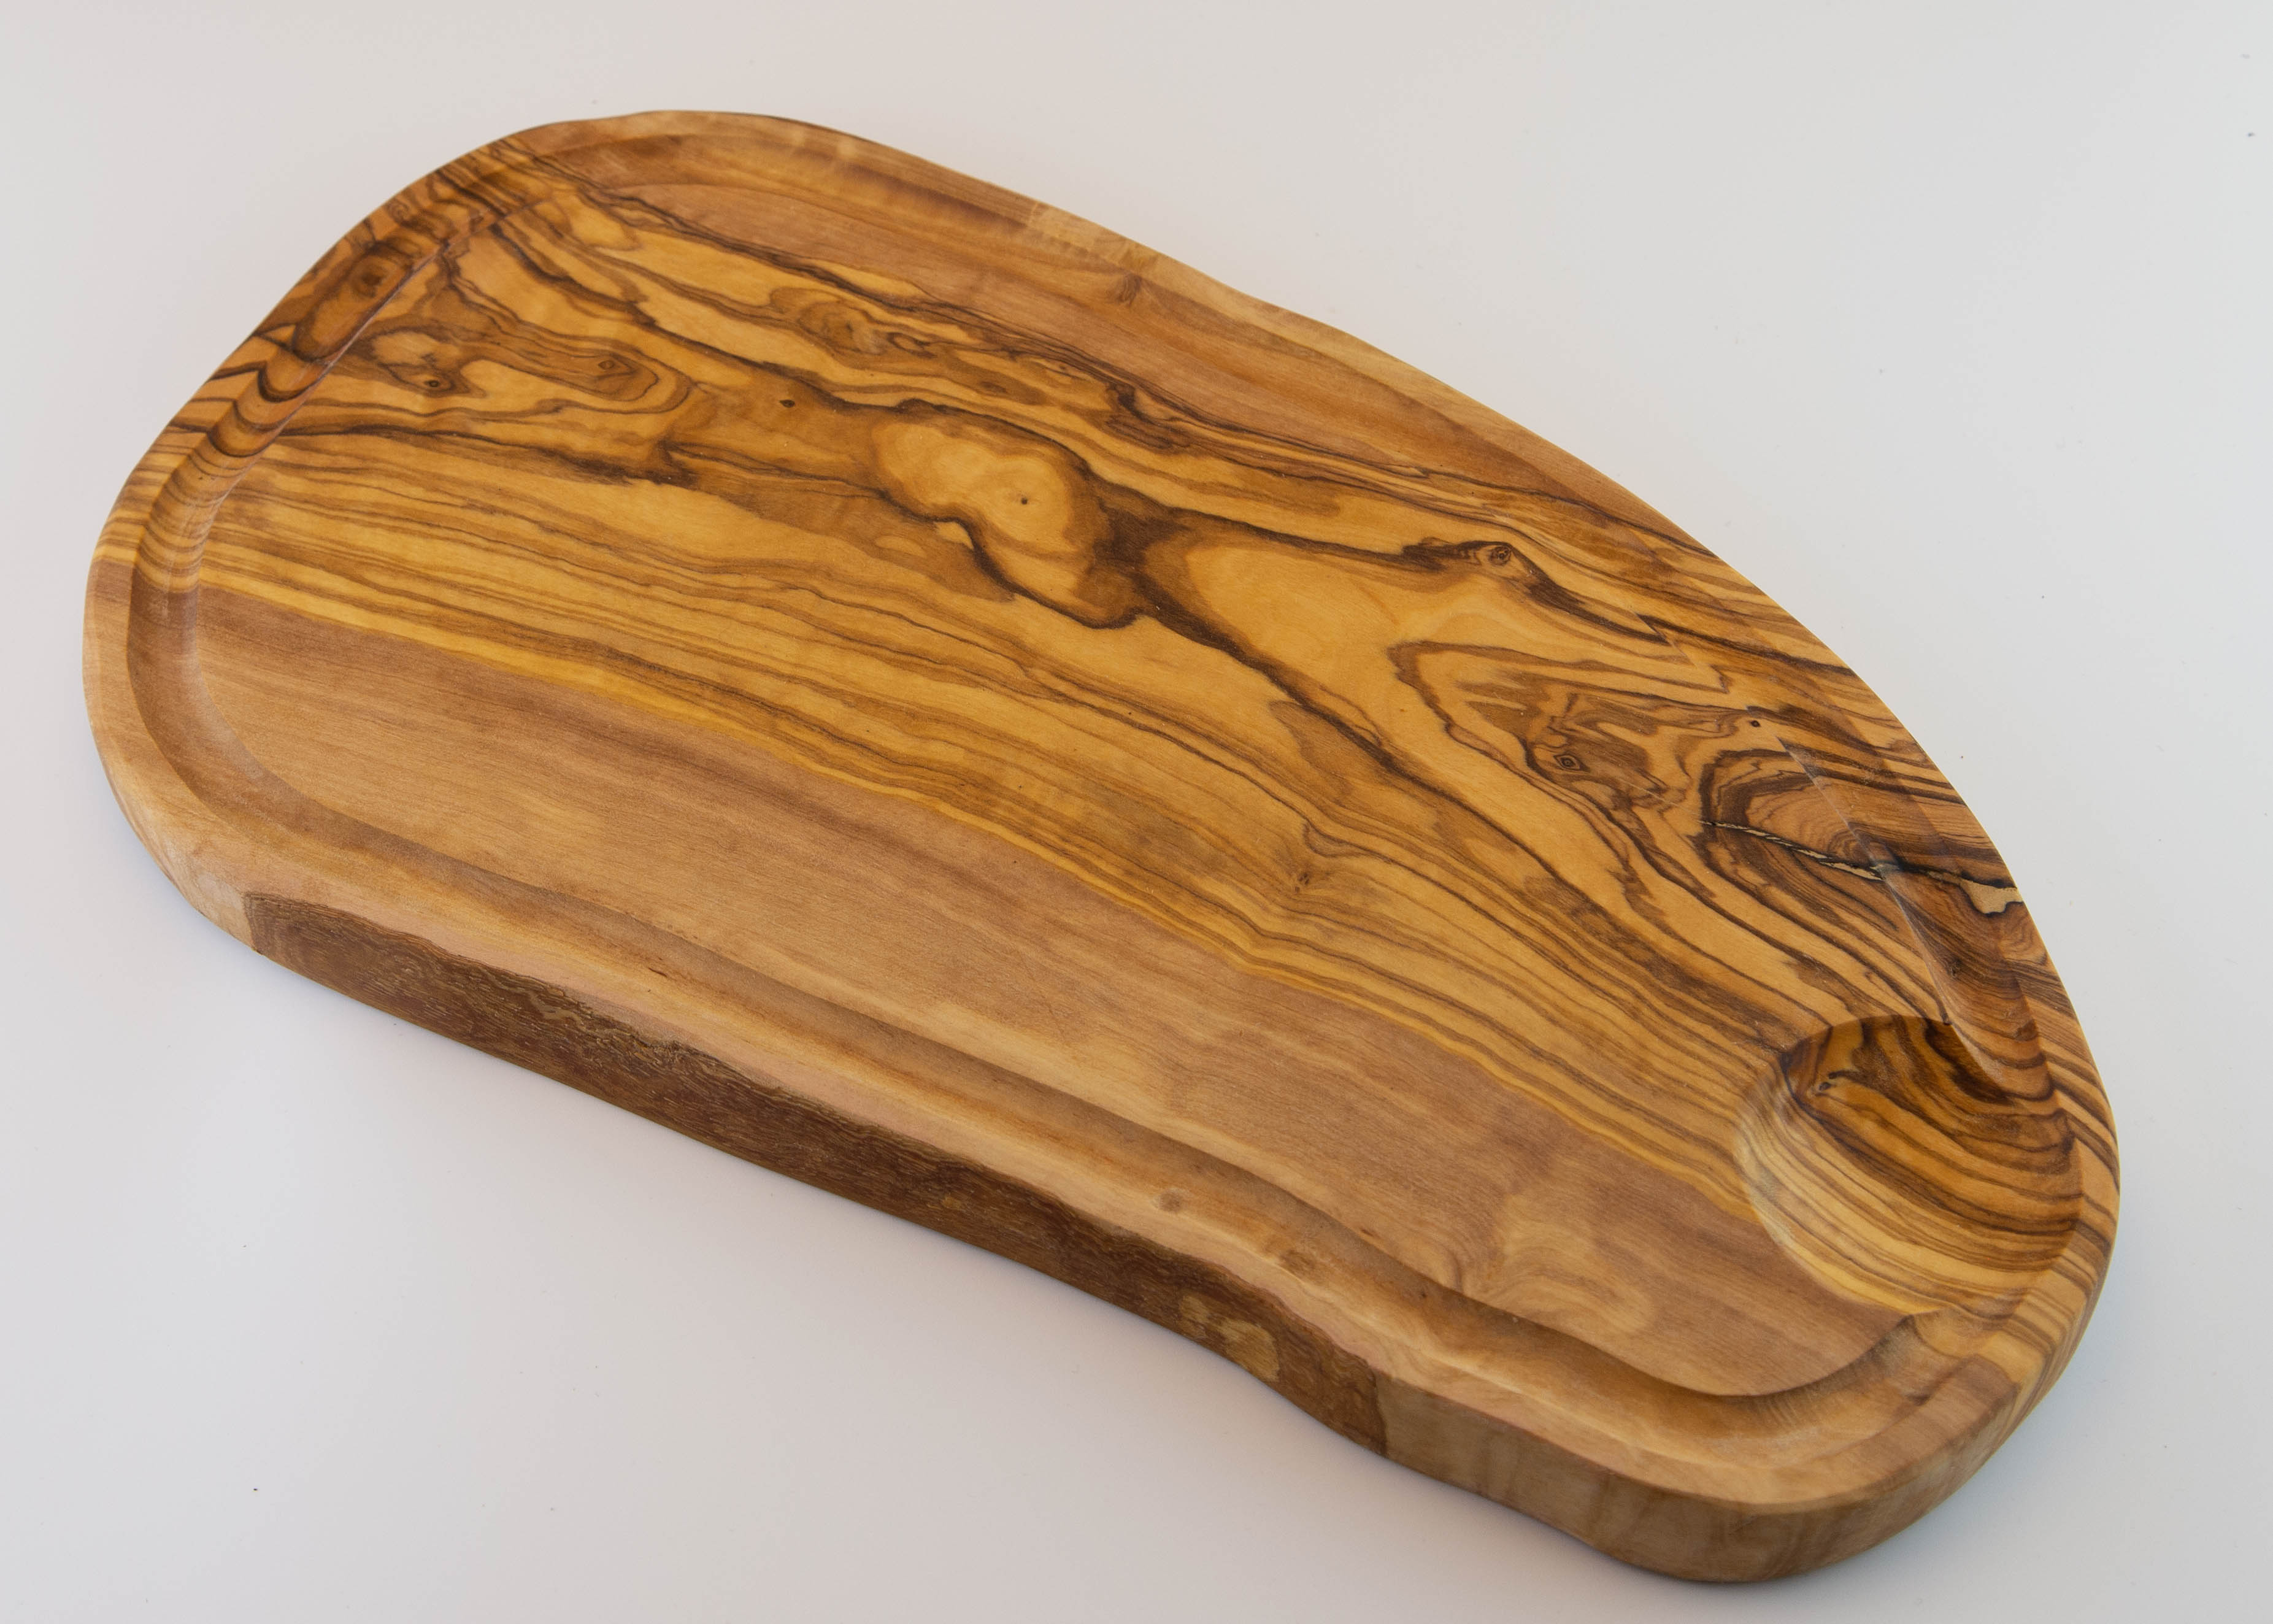 Carving board with engraving